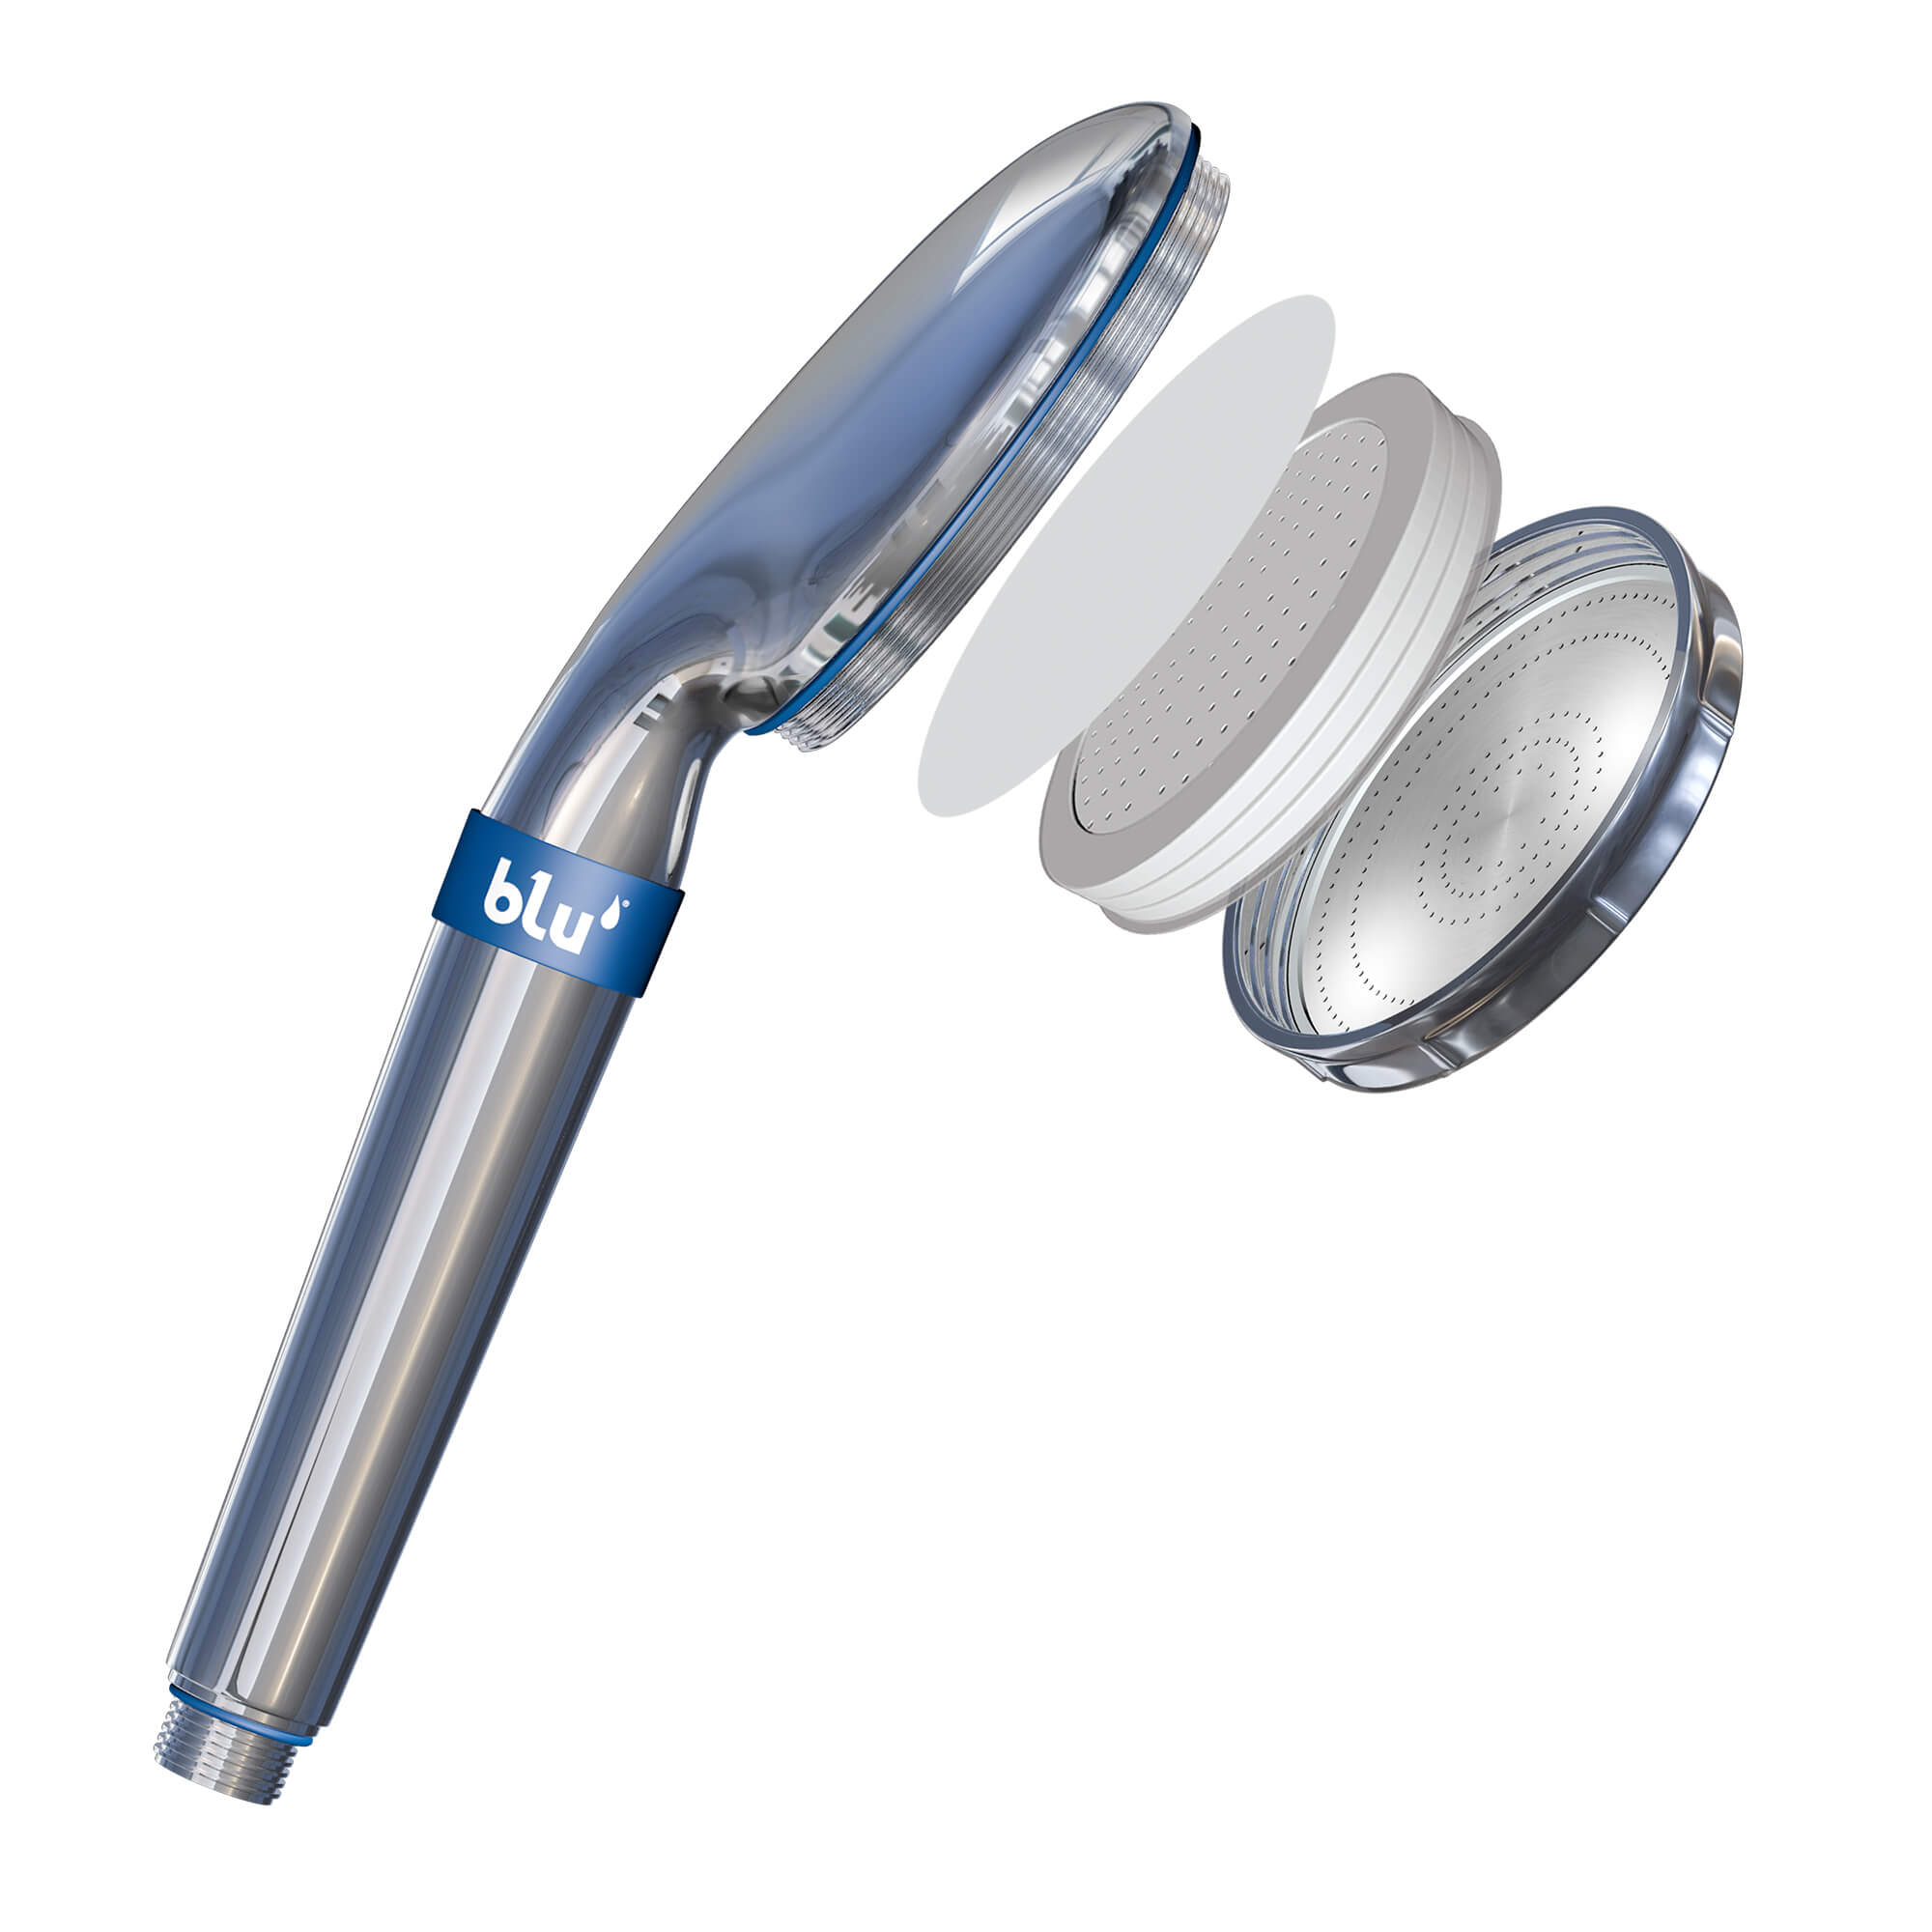 blu ionic shower filter handheld glossy chrome open side view